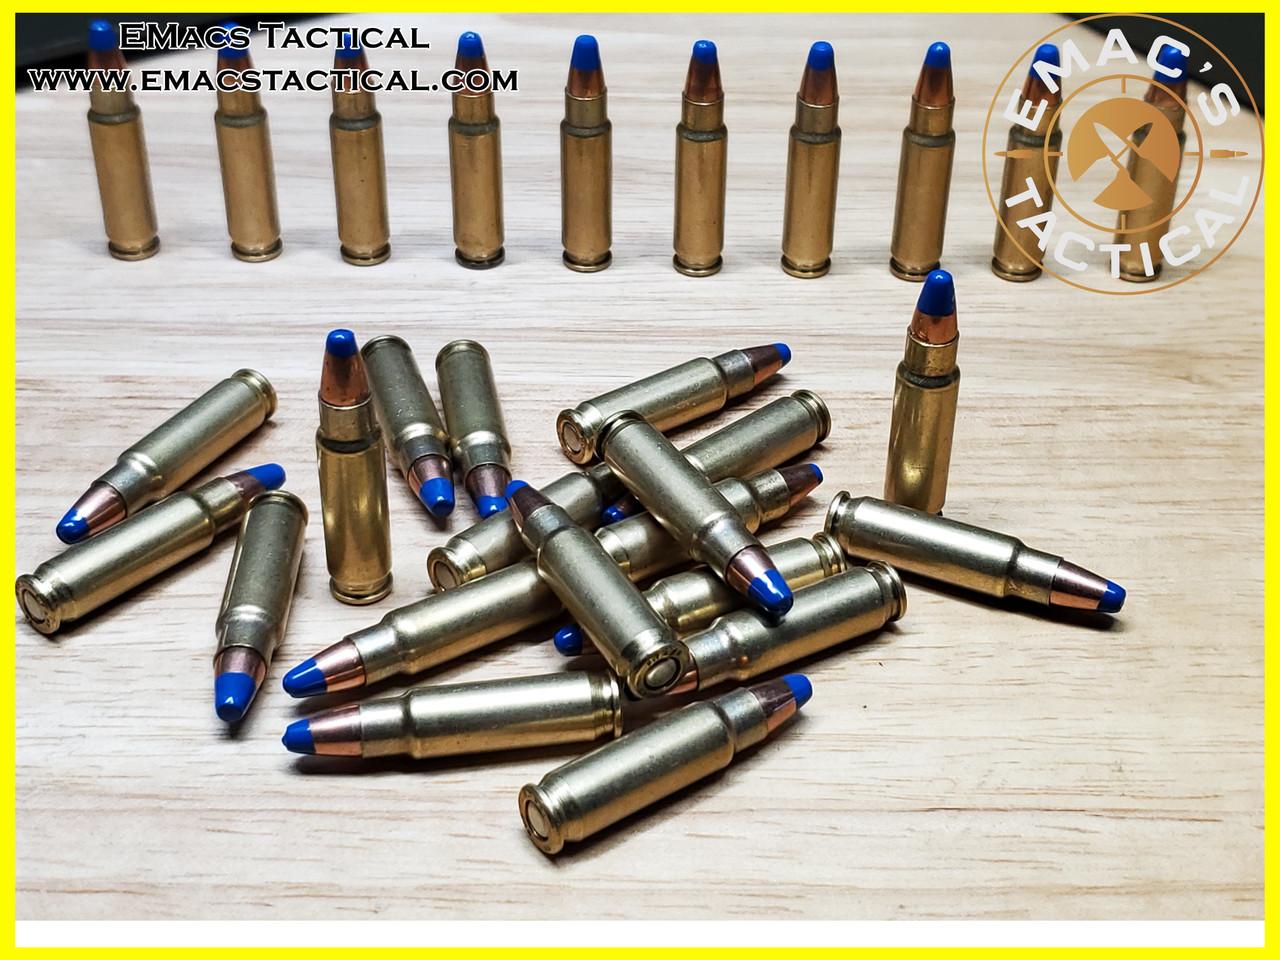 5.7x28 Heavy Incendiary Specialty Ammunition [20x Count]